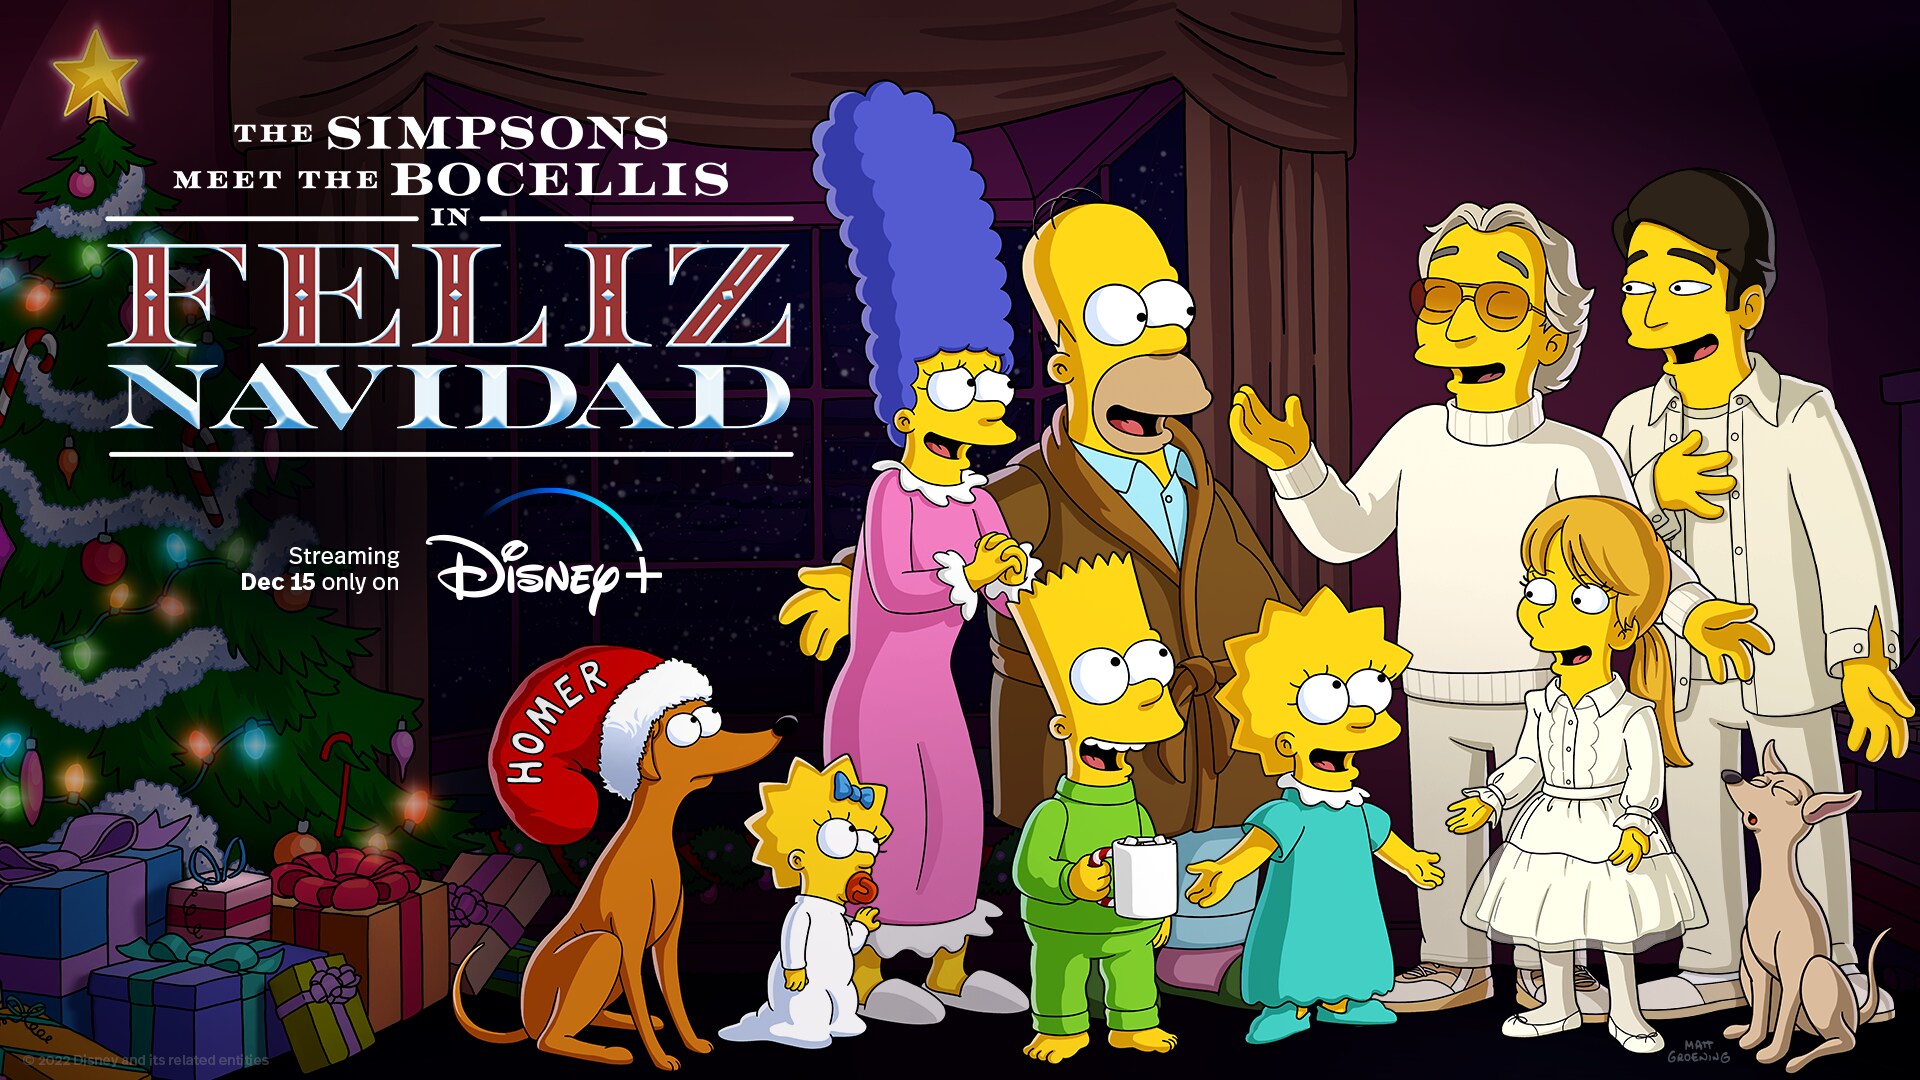 Celebrate The Holidays With The New Short “The Simpsons Meet The Bocellis In ‘Feliz Navidad’” Launching Dec. 15, Exclusively On Disney+